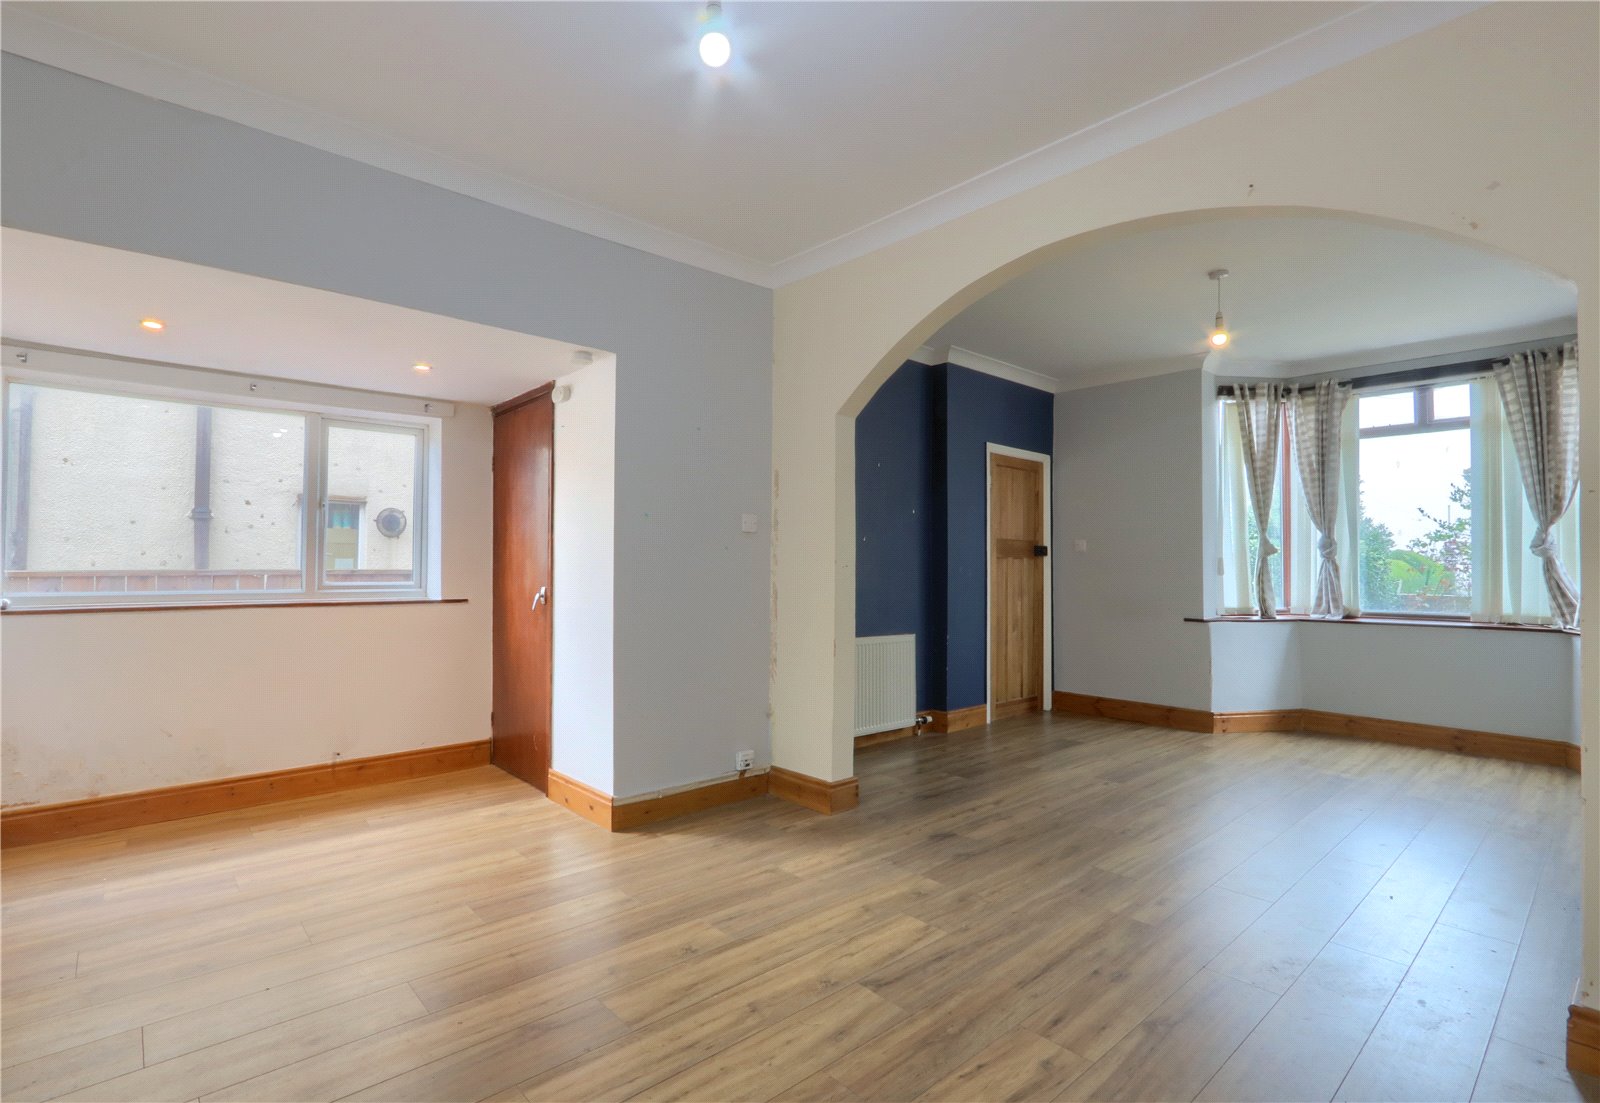 3 bed house for sale in Broadway East, Redcar 2